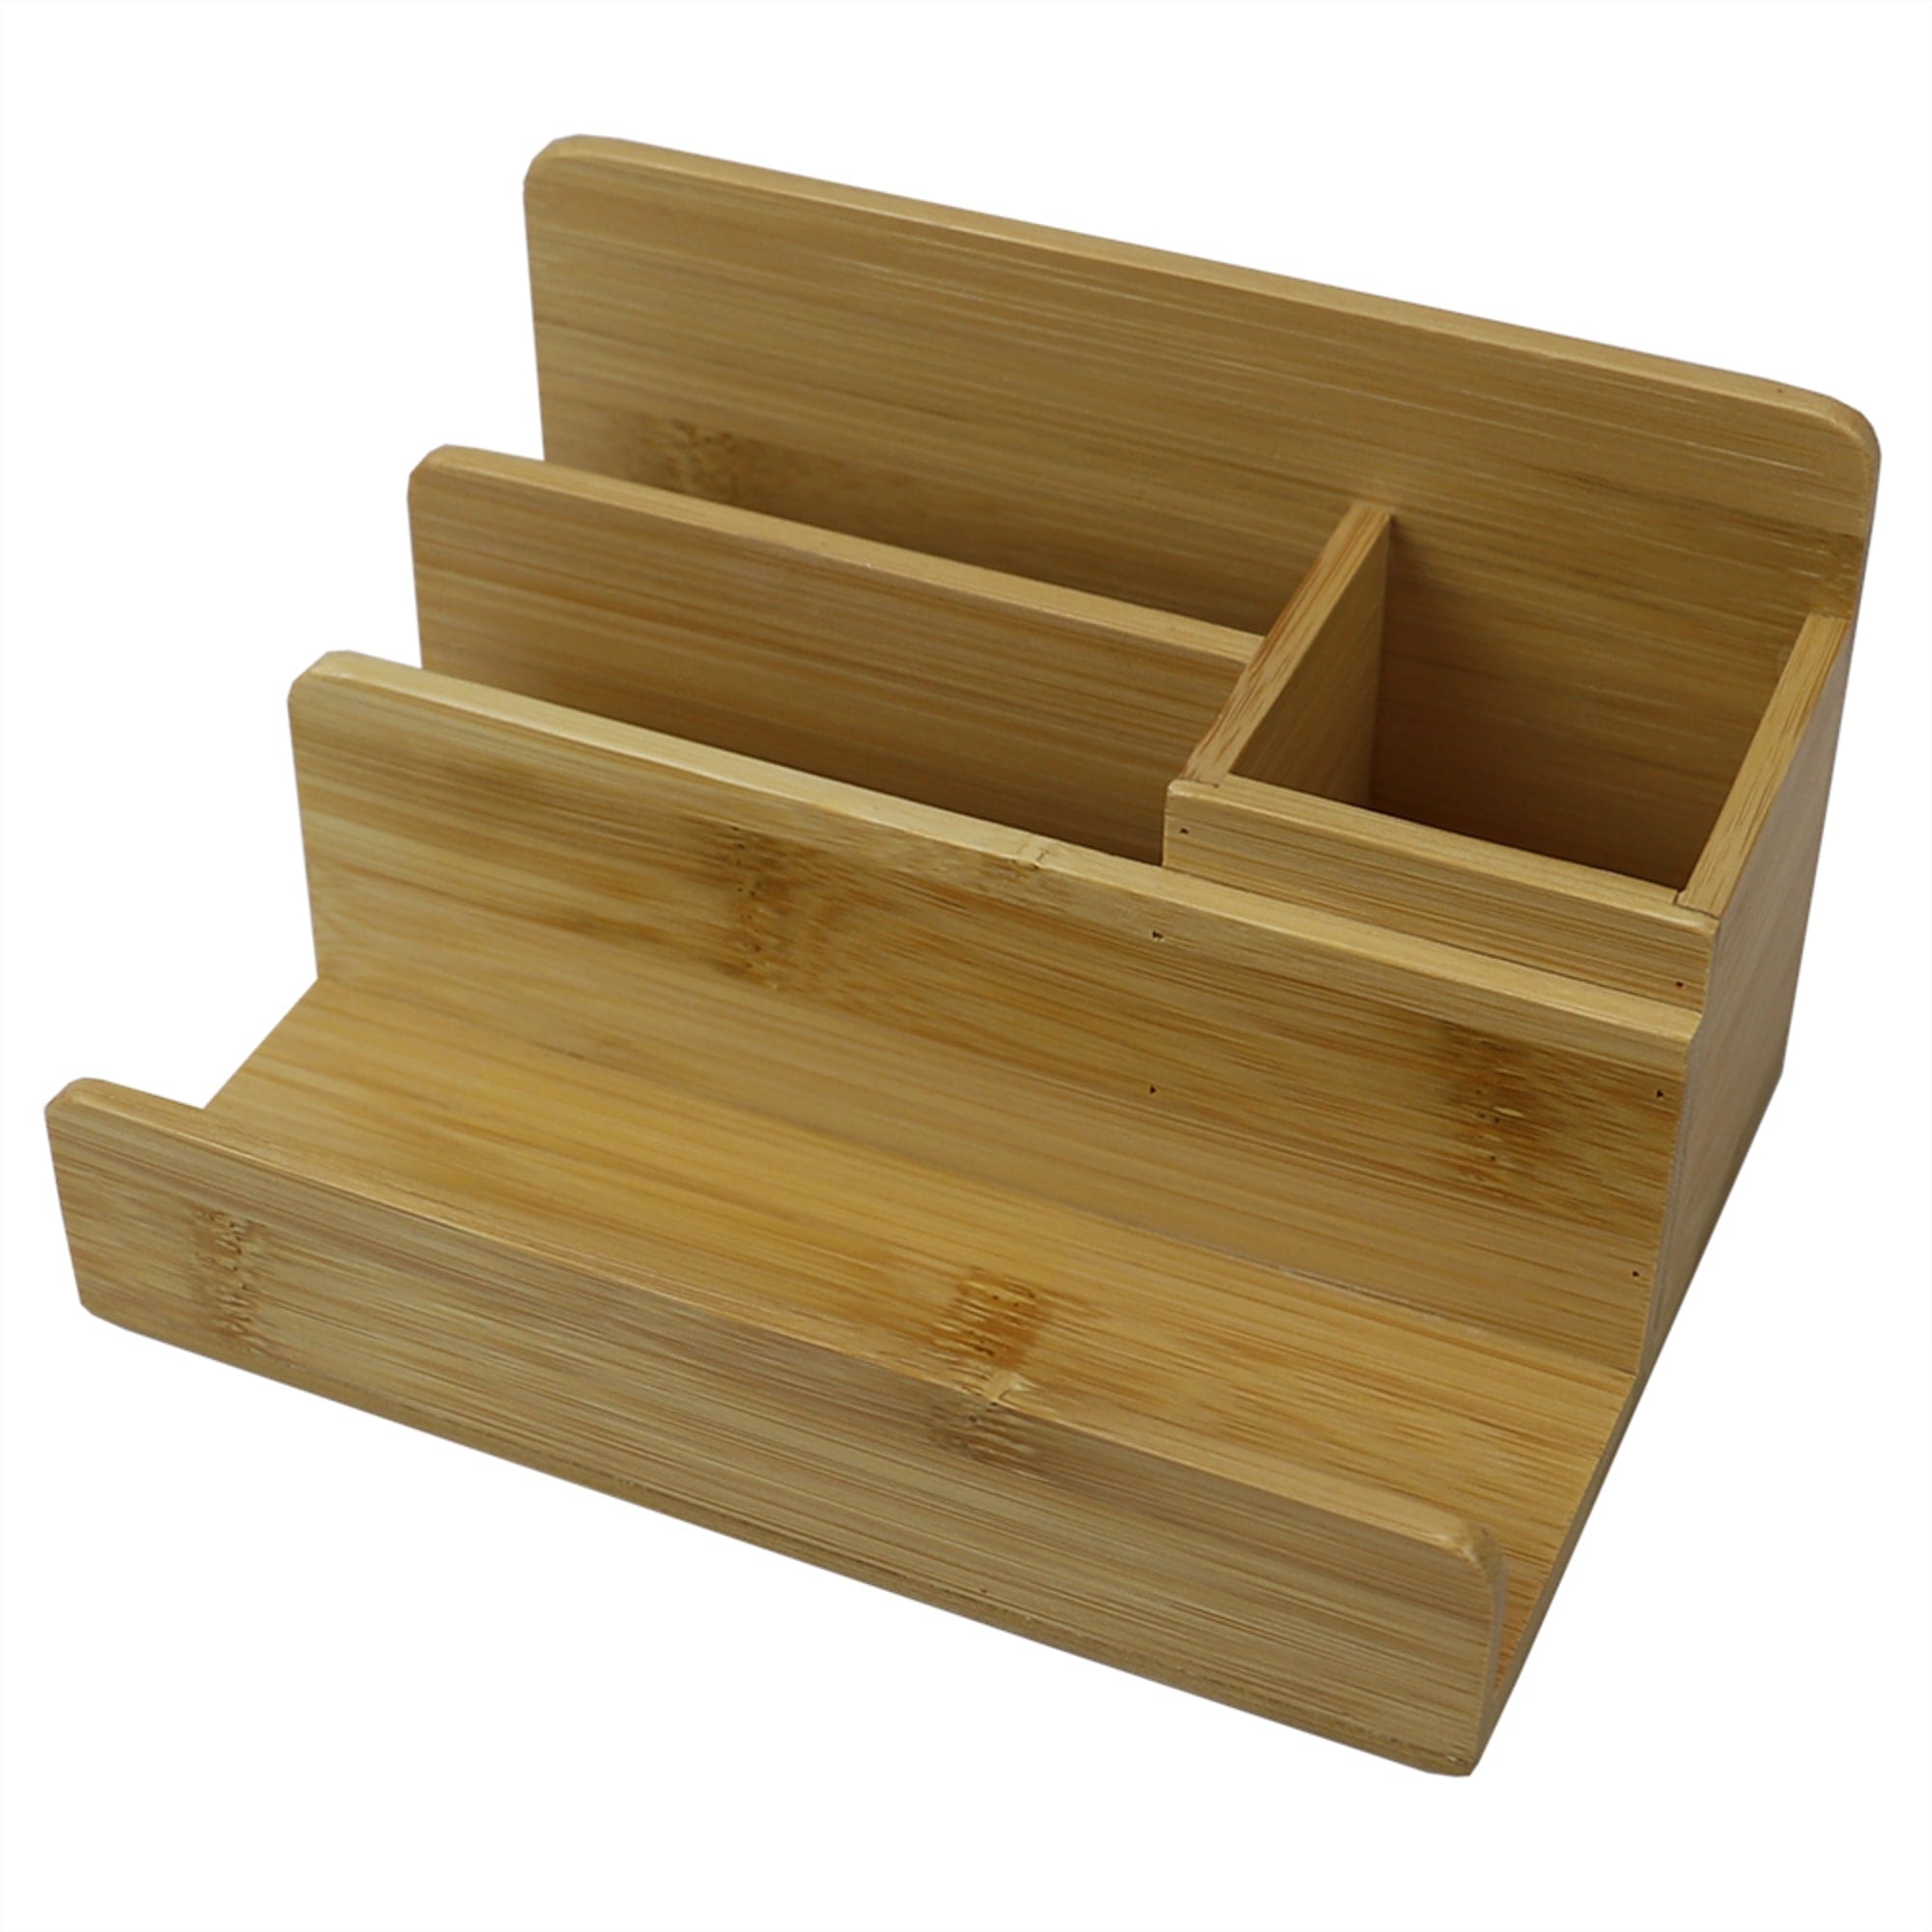 Home Basics 4 Compartment Bamboo Desktop Organizer, Natural $6.00 EACH, CASE PACK OF 6